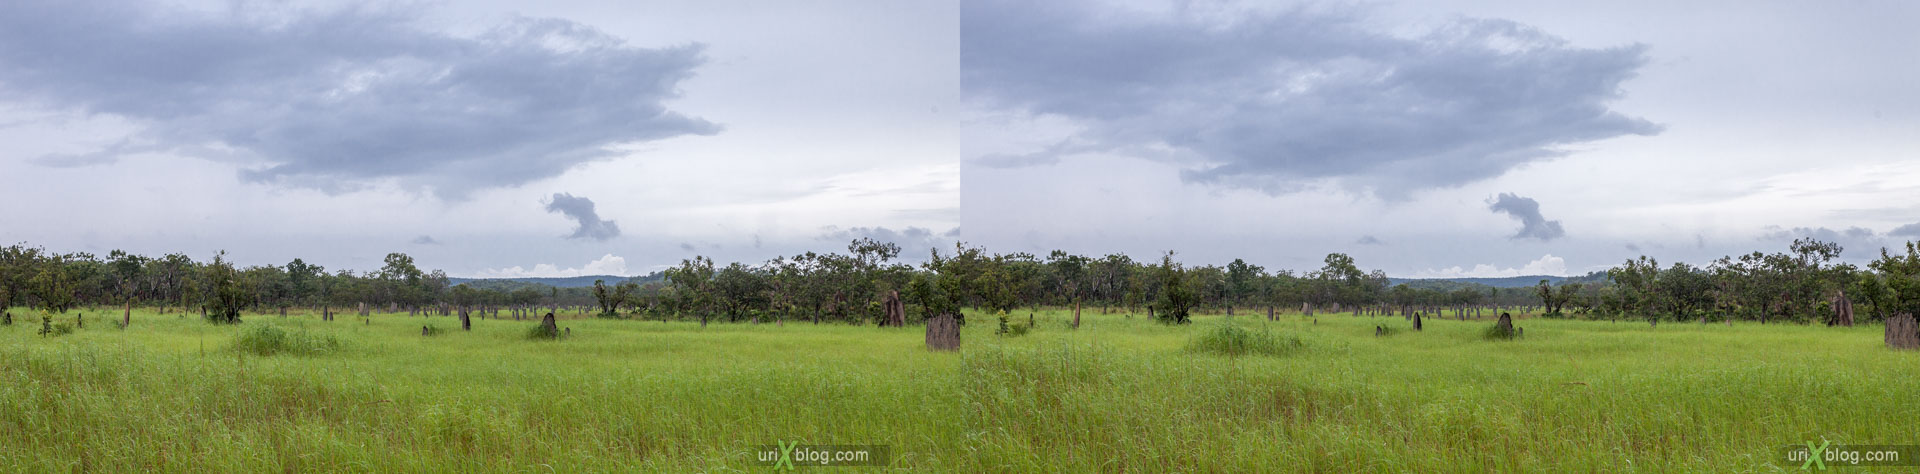 termite mound, Litchfield National Park, Northern Territory, Australia, 3D, stereo pair, cross-eyed, crossview, cross view stereo pair, stereoscopic, 2011